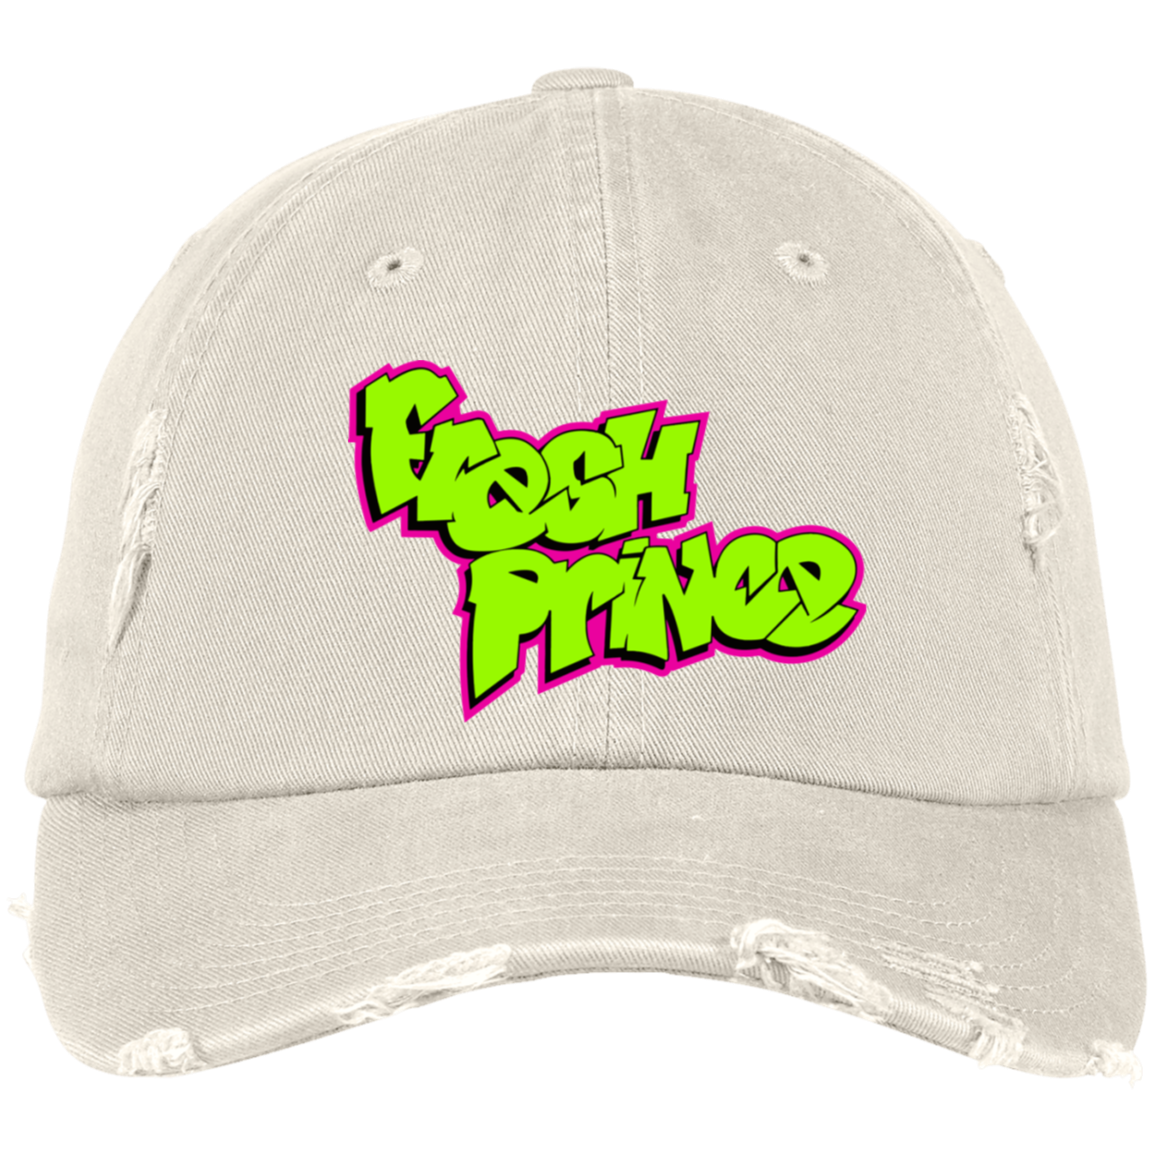 Prince Embroidered Distressed Dad Cap